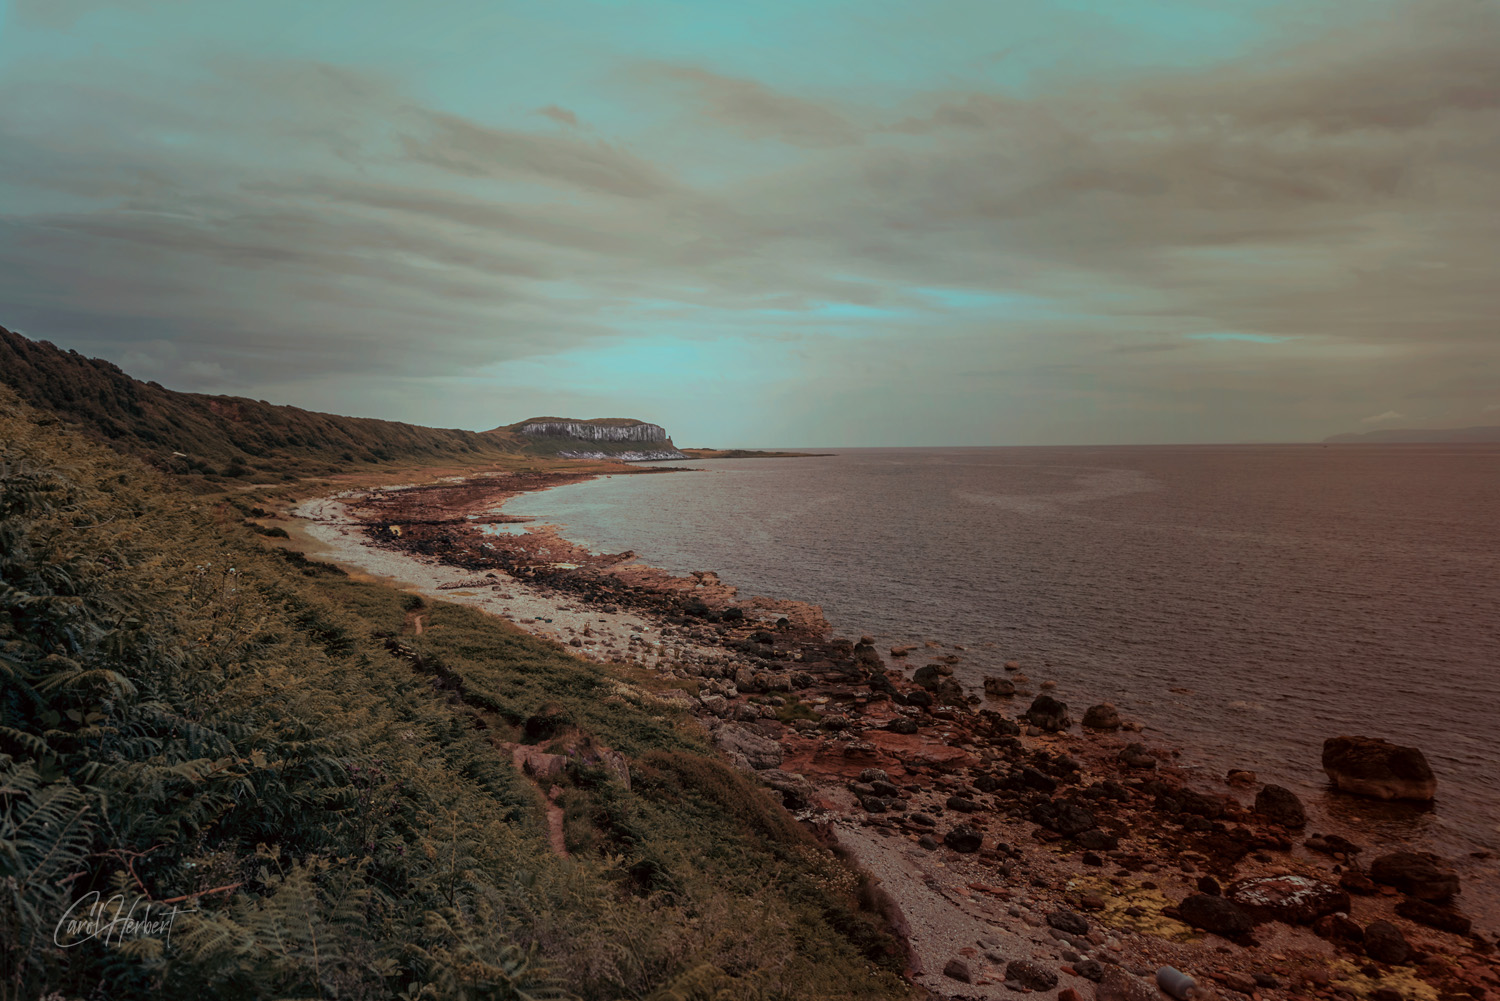 Photograph of Drumadoon Point Isle of Arran